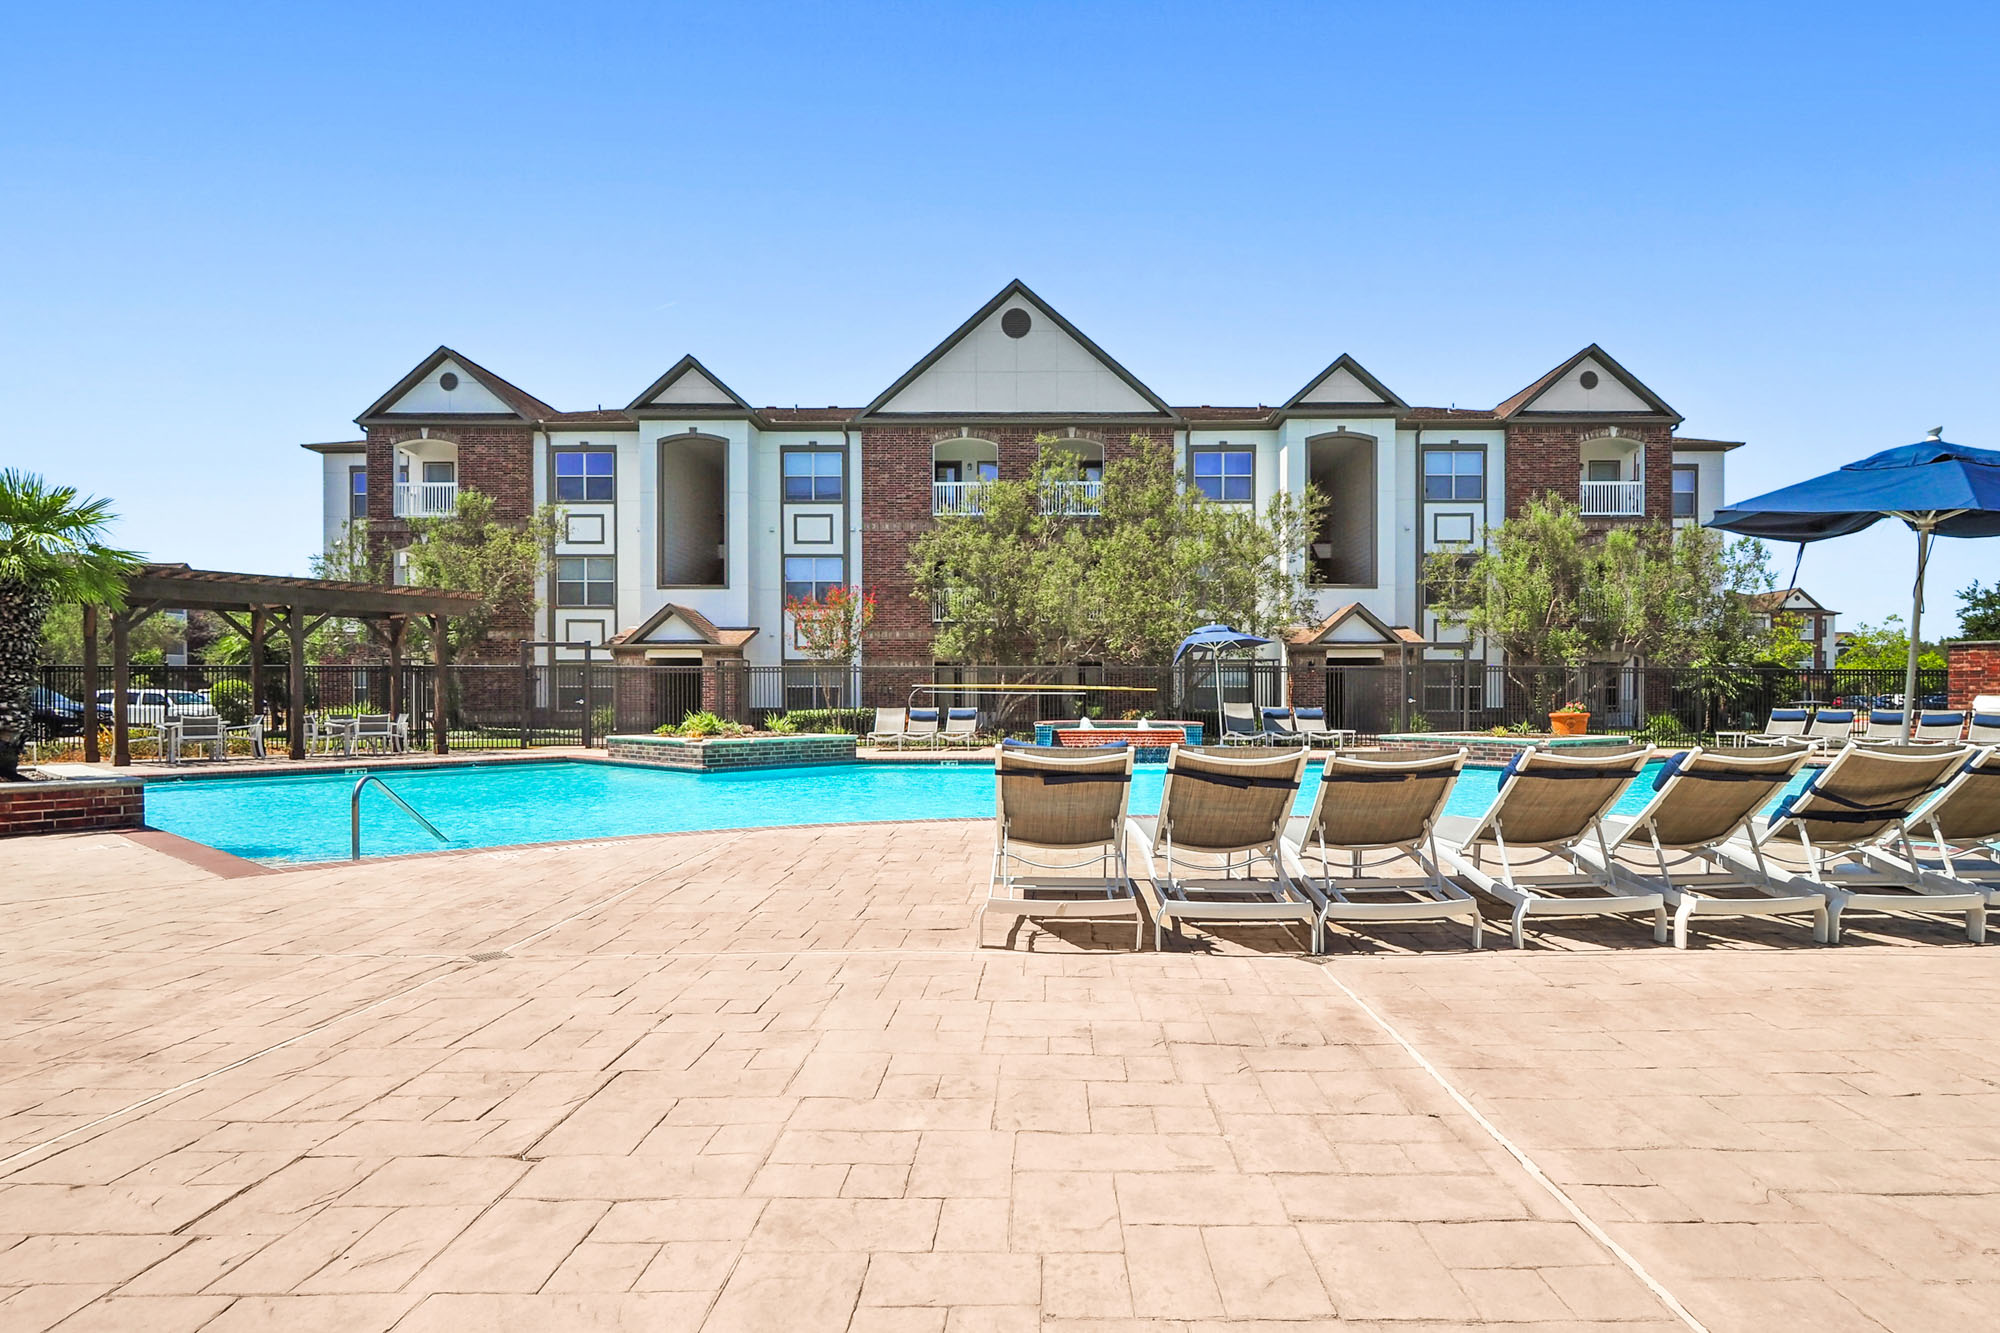 The pool at The Villas at Shadow Creek apartments in Houston, TX.